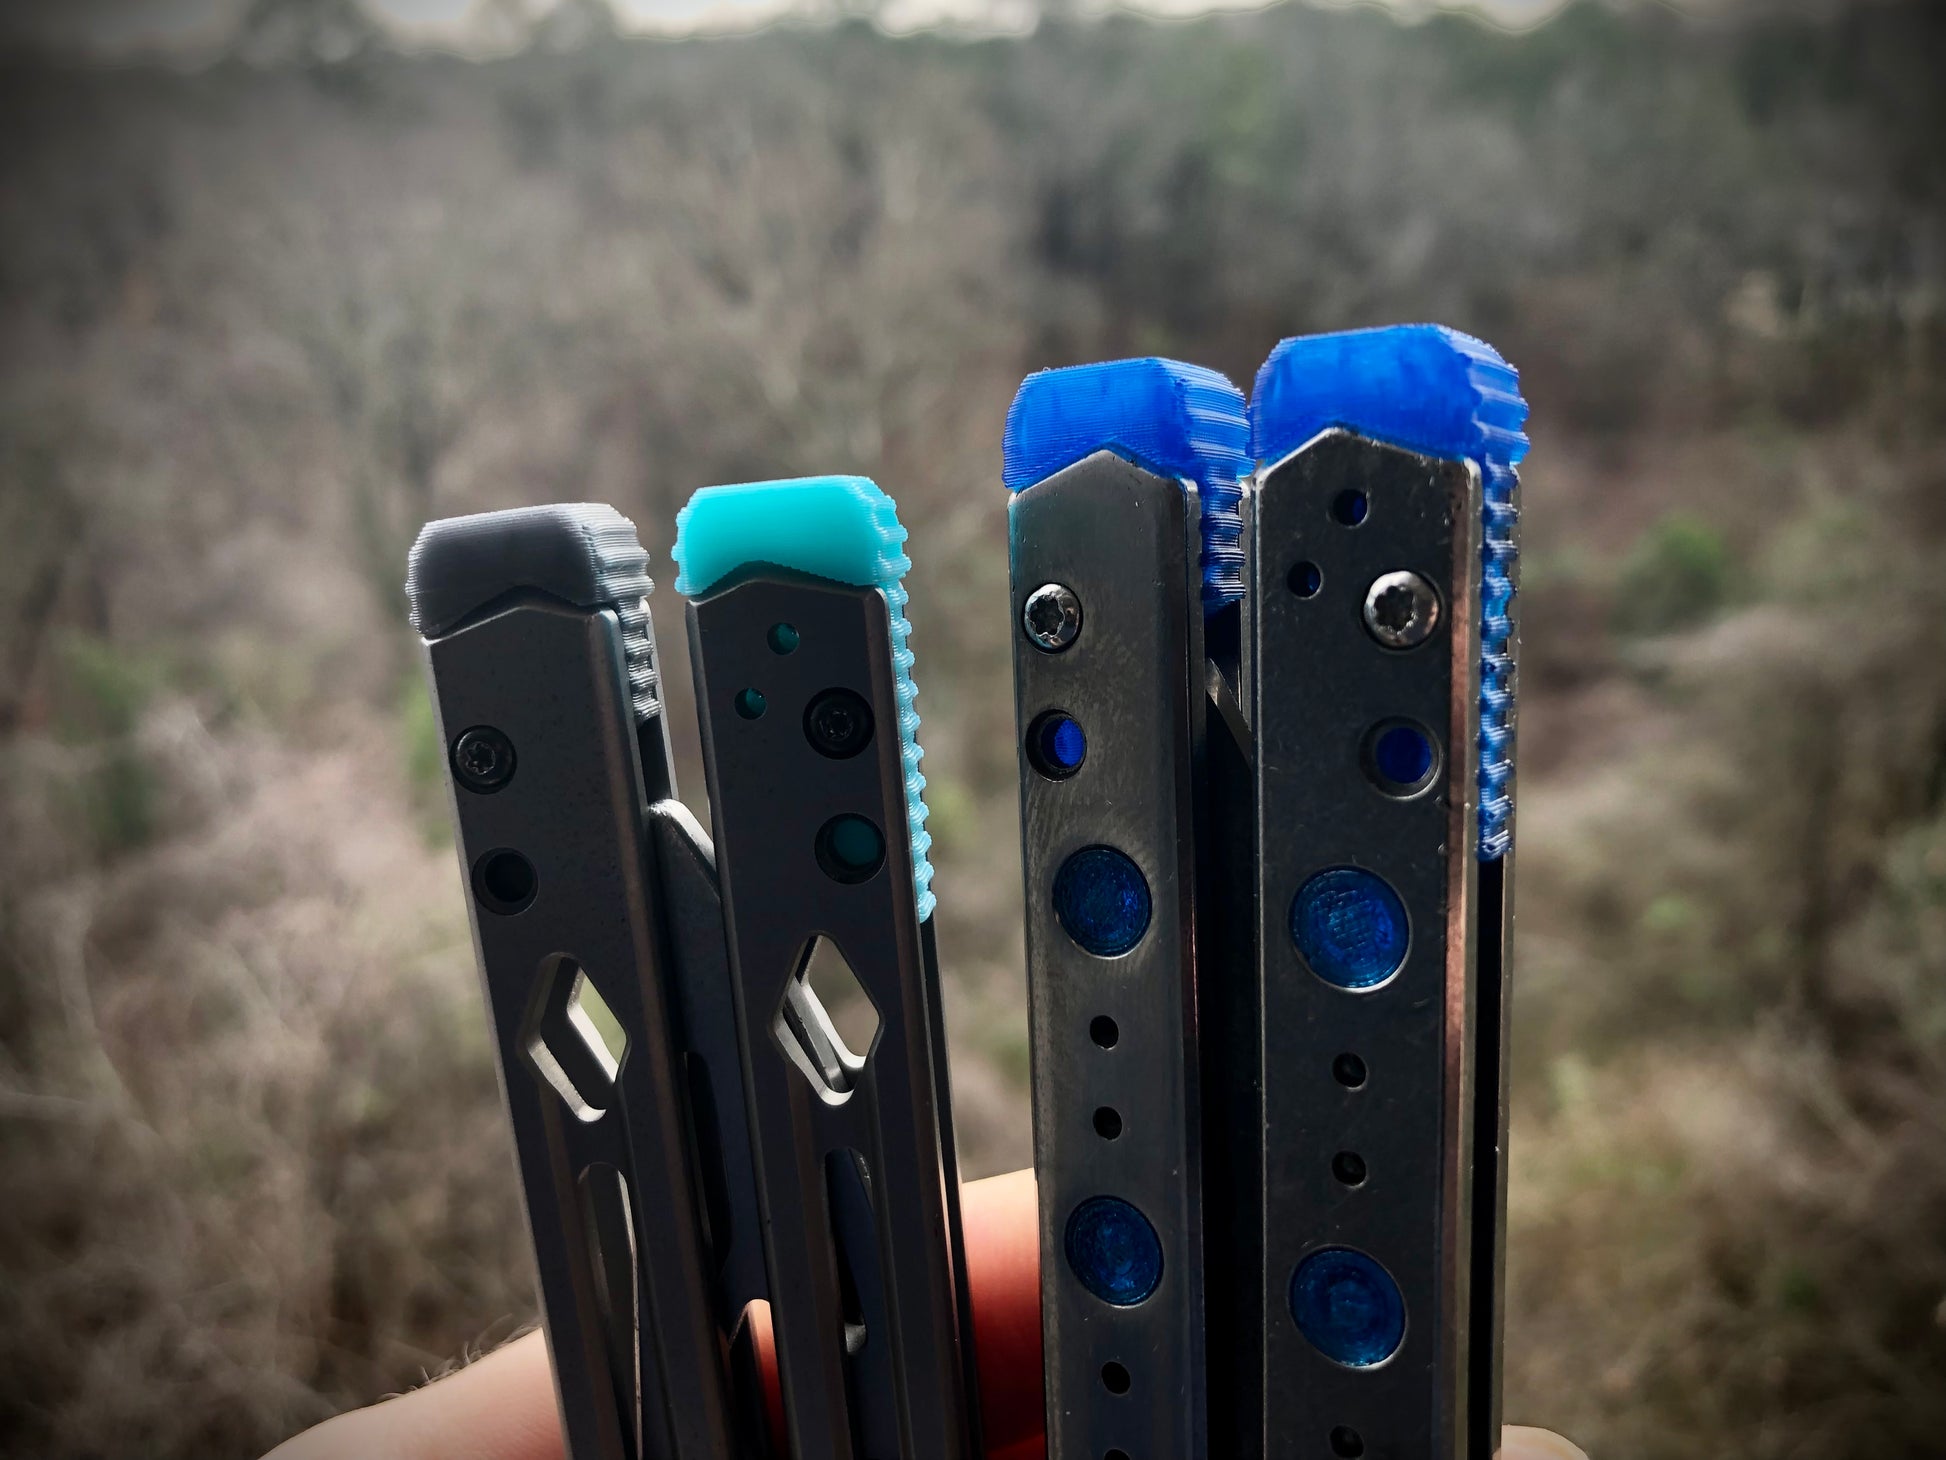 Improve the balance of your Kershaw Lucha balisong for flipping with Zippy mods: extension spacers with Jimping for the Kershaw Lucha and Flytanium Lucha, and the ZippyLucha handle mod with the high-performance Zippy bearing system.